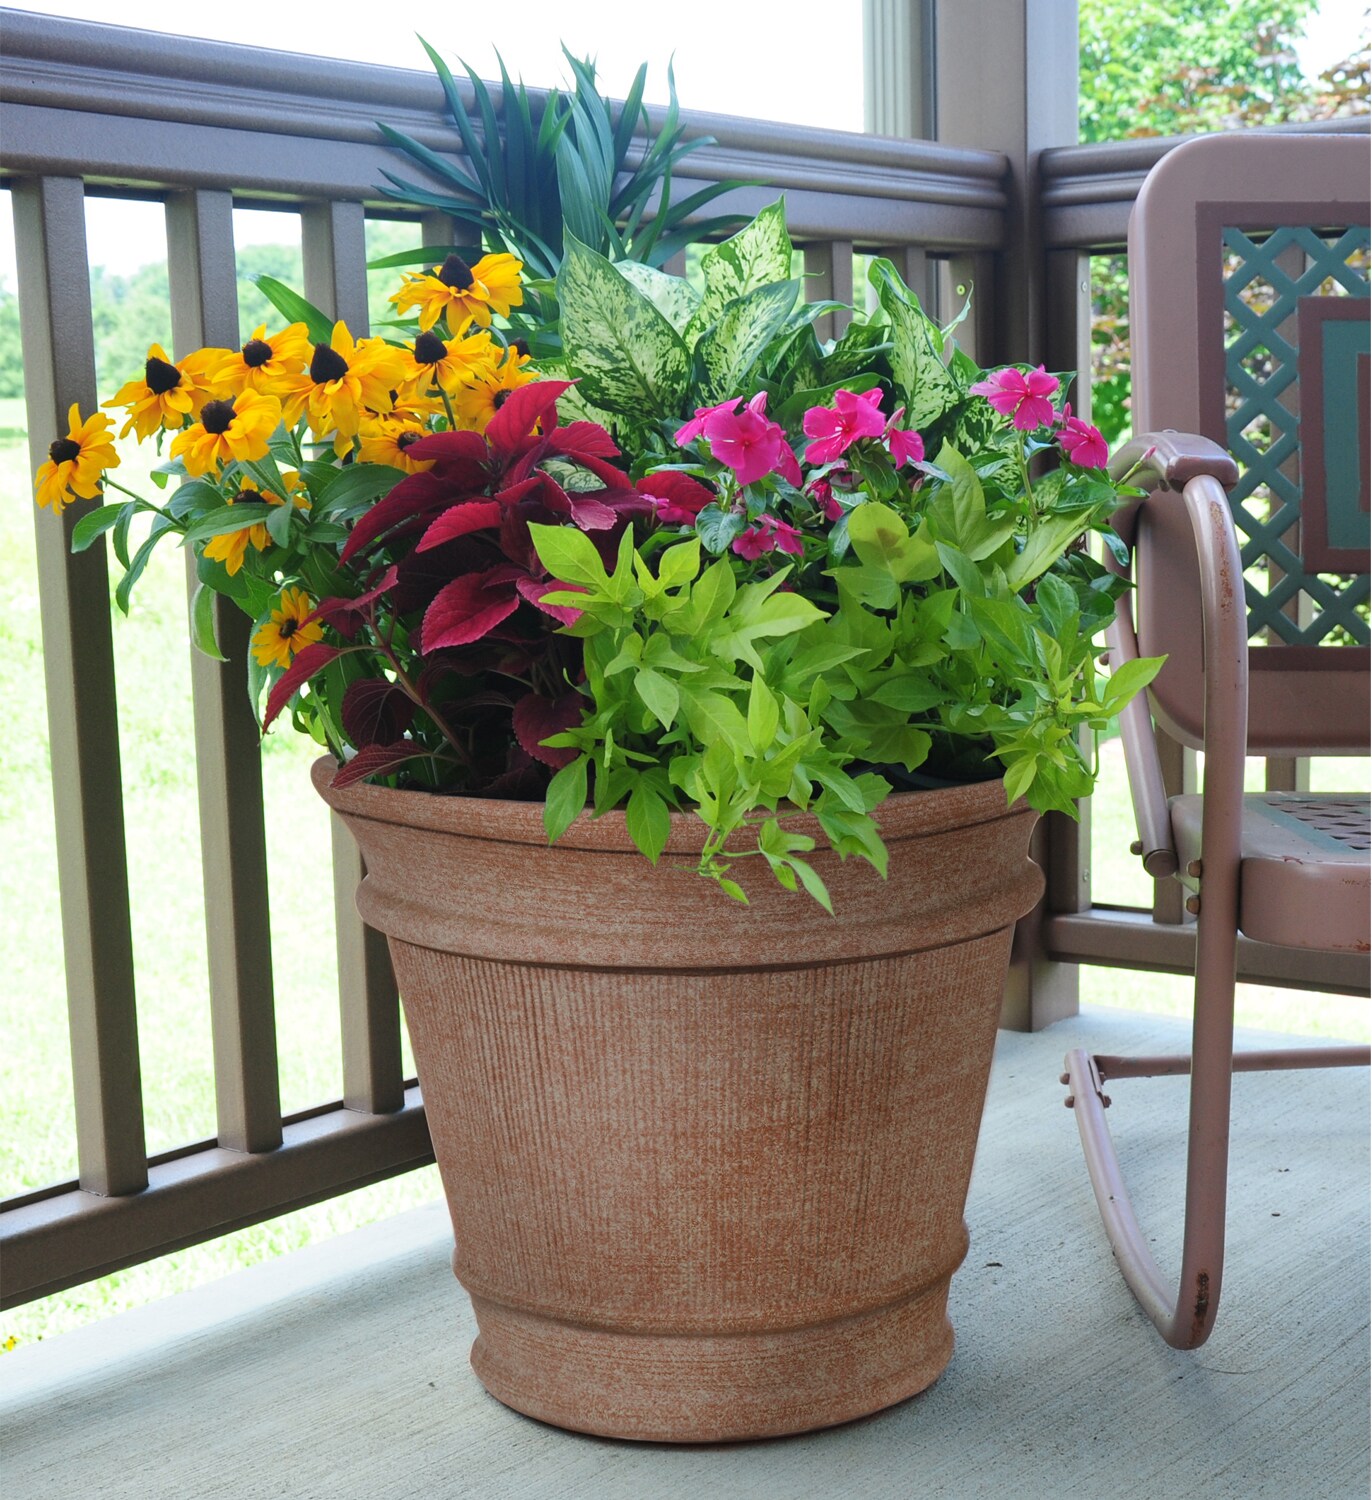 2 Large Planting pots for 12.99 